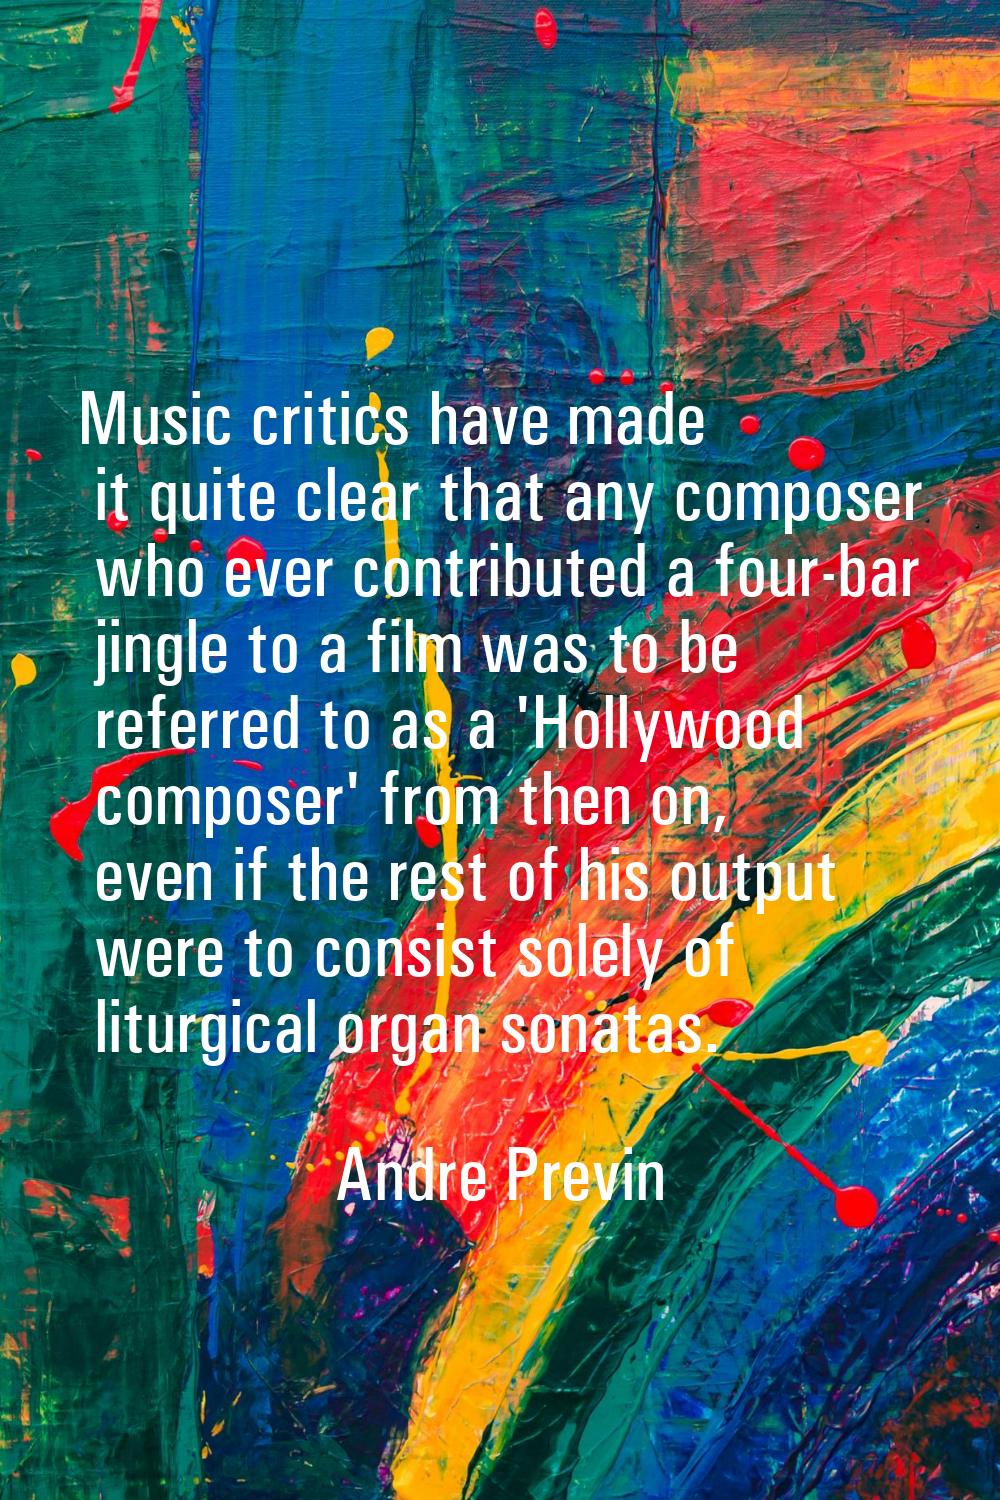 Music critics have made it quite clear that any composer who ever contributed a four-bar jingle to 